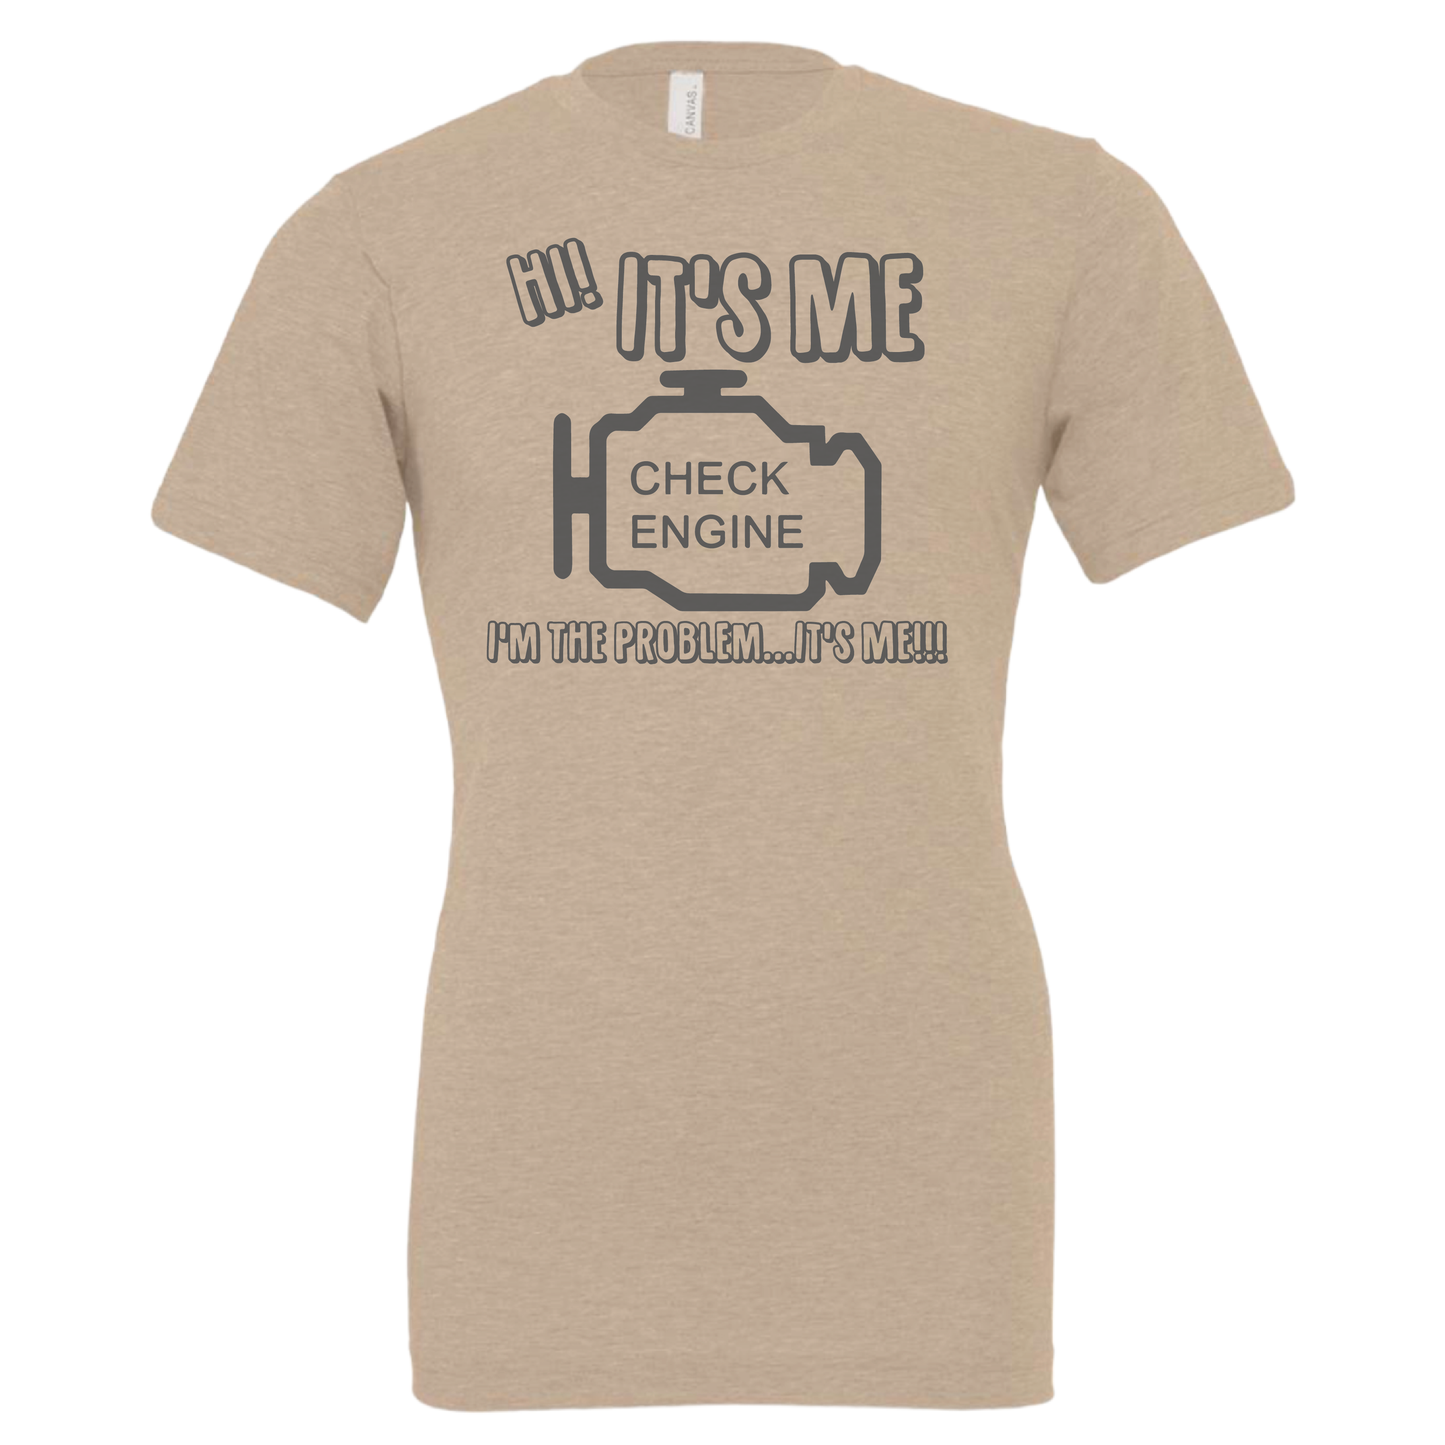 Check Engine - Shirt, Tank Top, Long Sleeve or Hoodie - Available in Multiple Colors